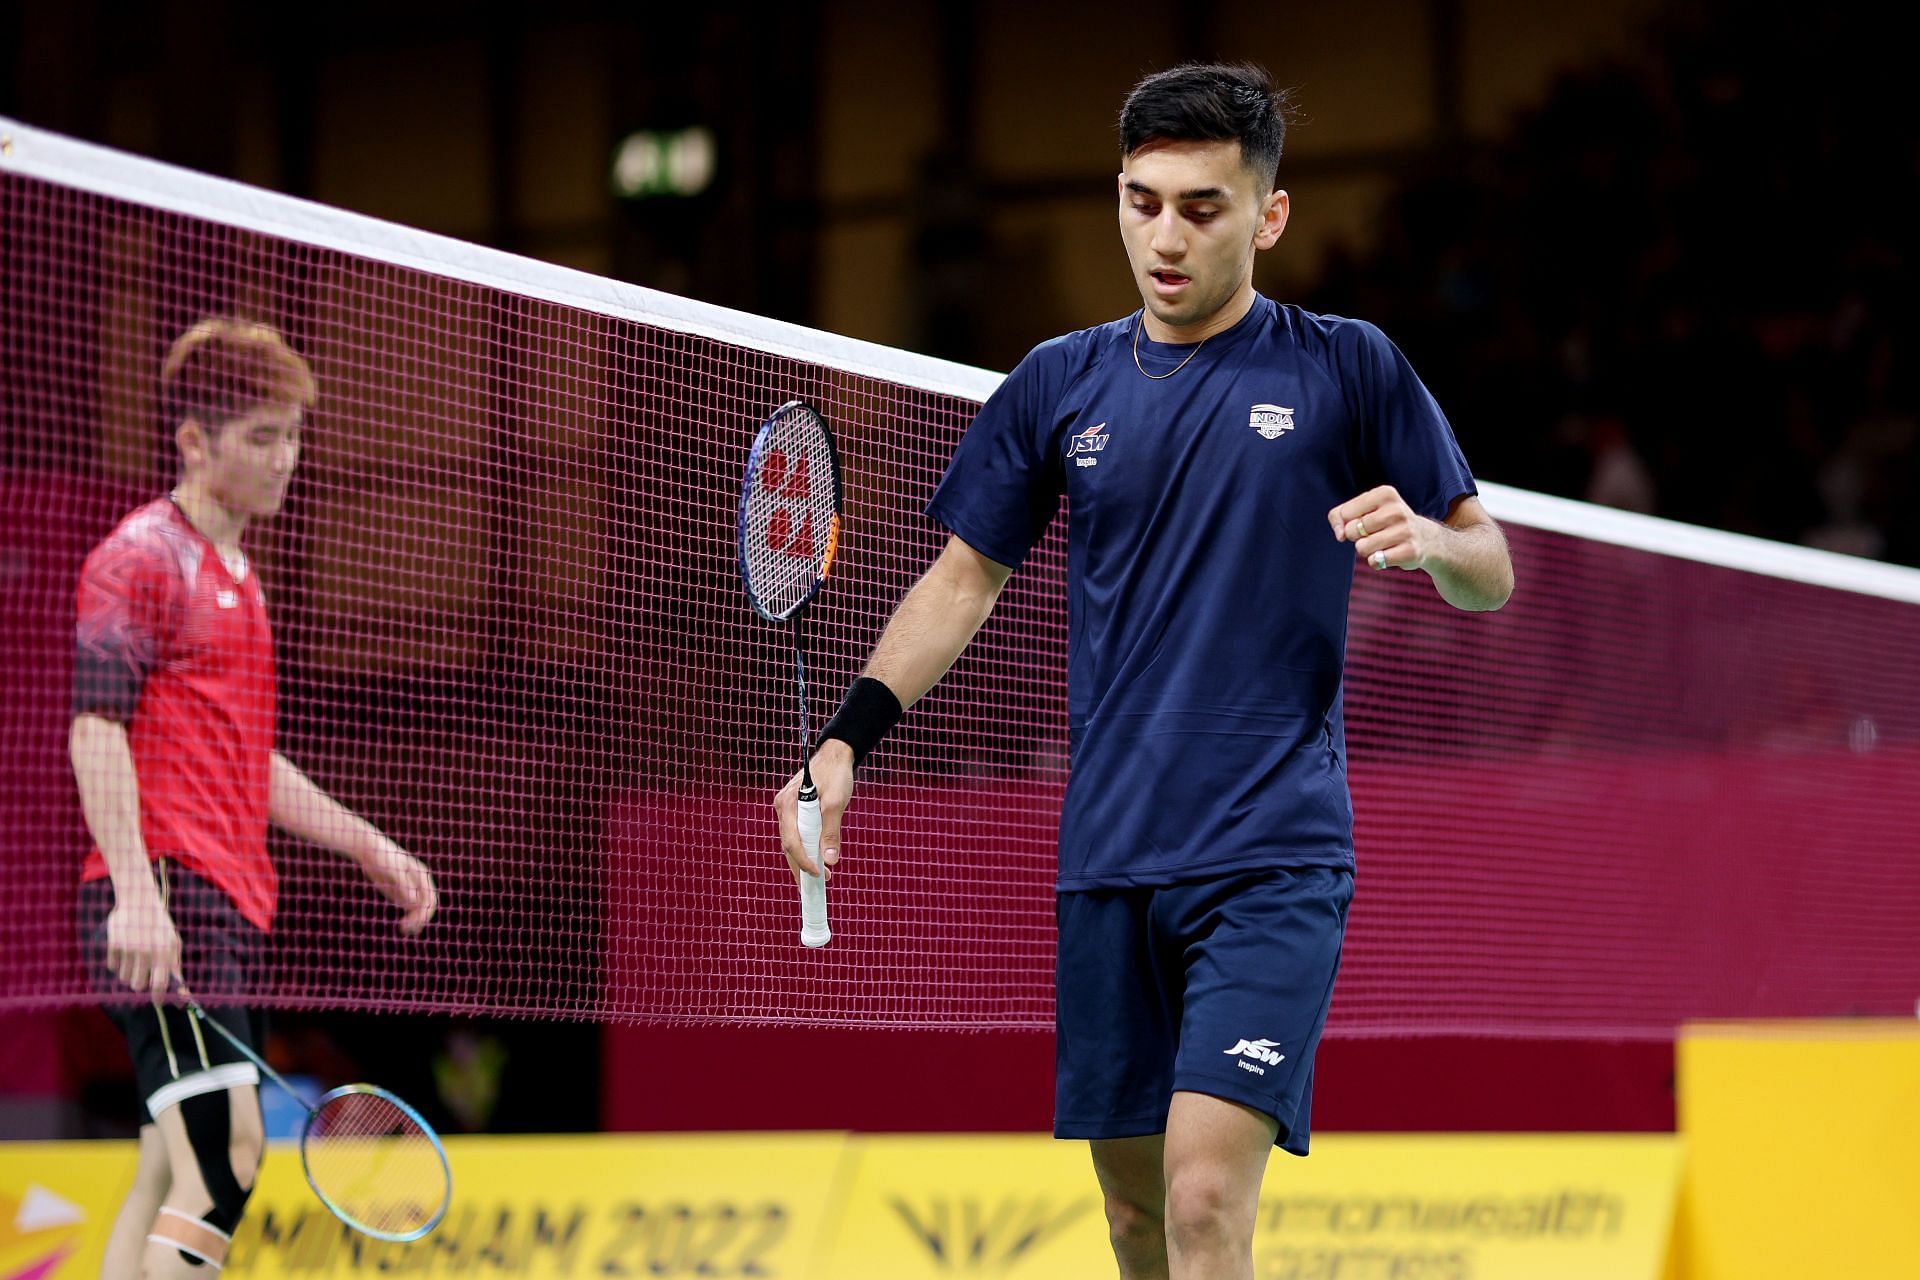 CWG 2022, Lakshya Sen vs Tze Yong NG gold medal match Preview, head-to-head, prediction, where to watch and live streaming details